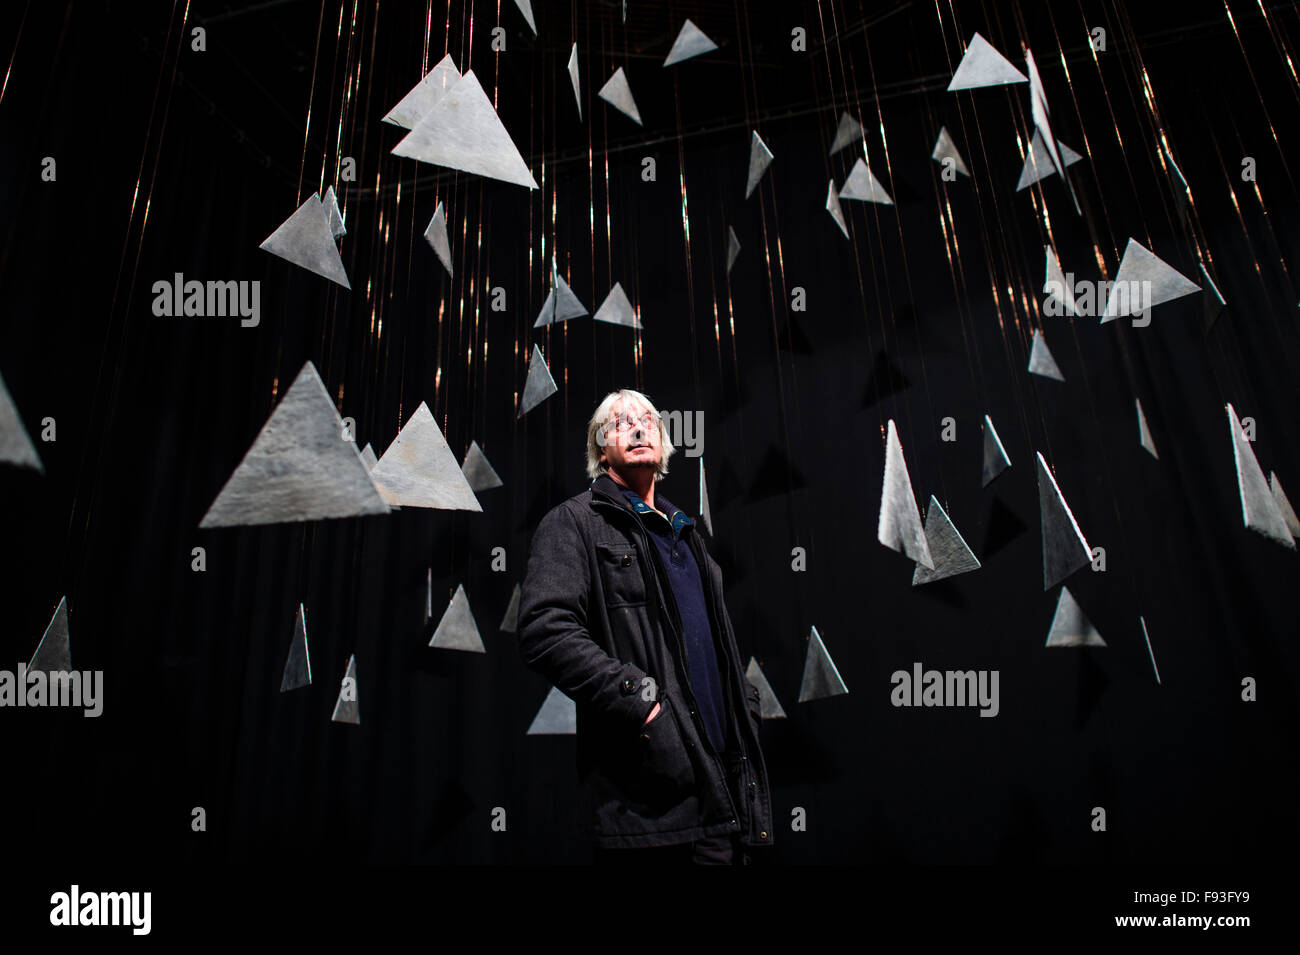 The Fractal Clock, created by artist and performer Richard Downing (pictured standing amongst the hanging slates) , at Castle Theatre Aberystwyth , consisting of 180 triangles of slate, each rotating at a different rate, all coming together to form the complete pattern, viewable from a fixed point in the auditorium,  once every hour. Stock Photo